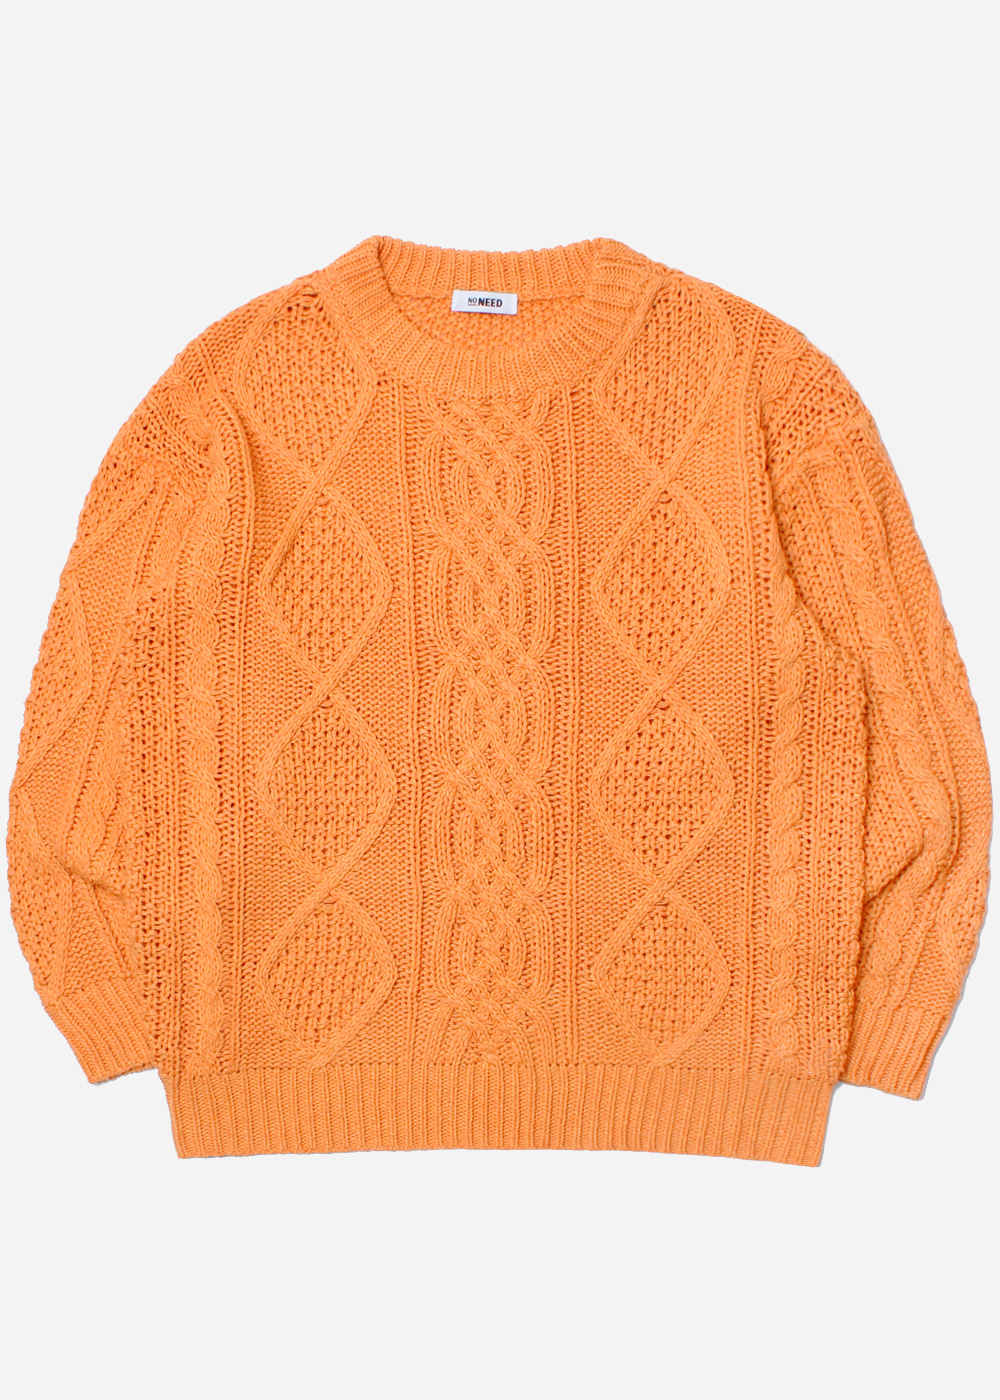 NO NEED’over fit’ poly cable knit sweater